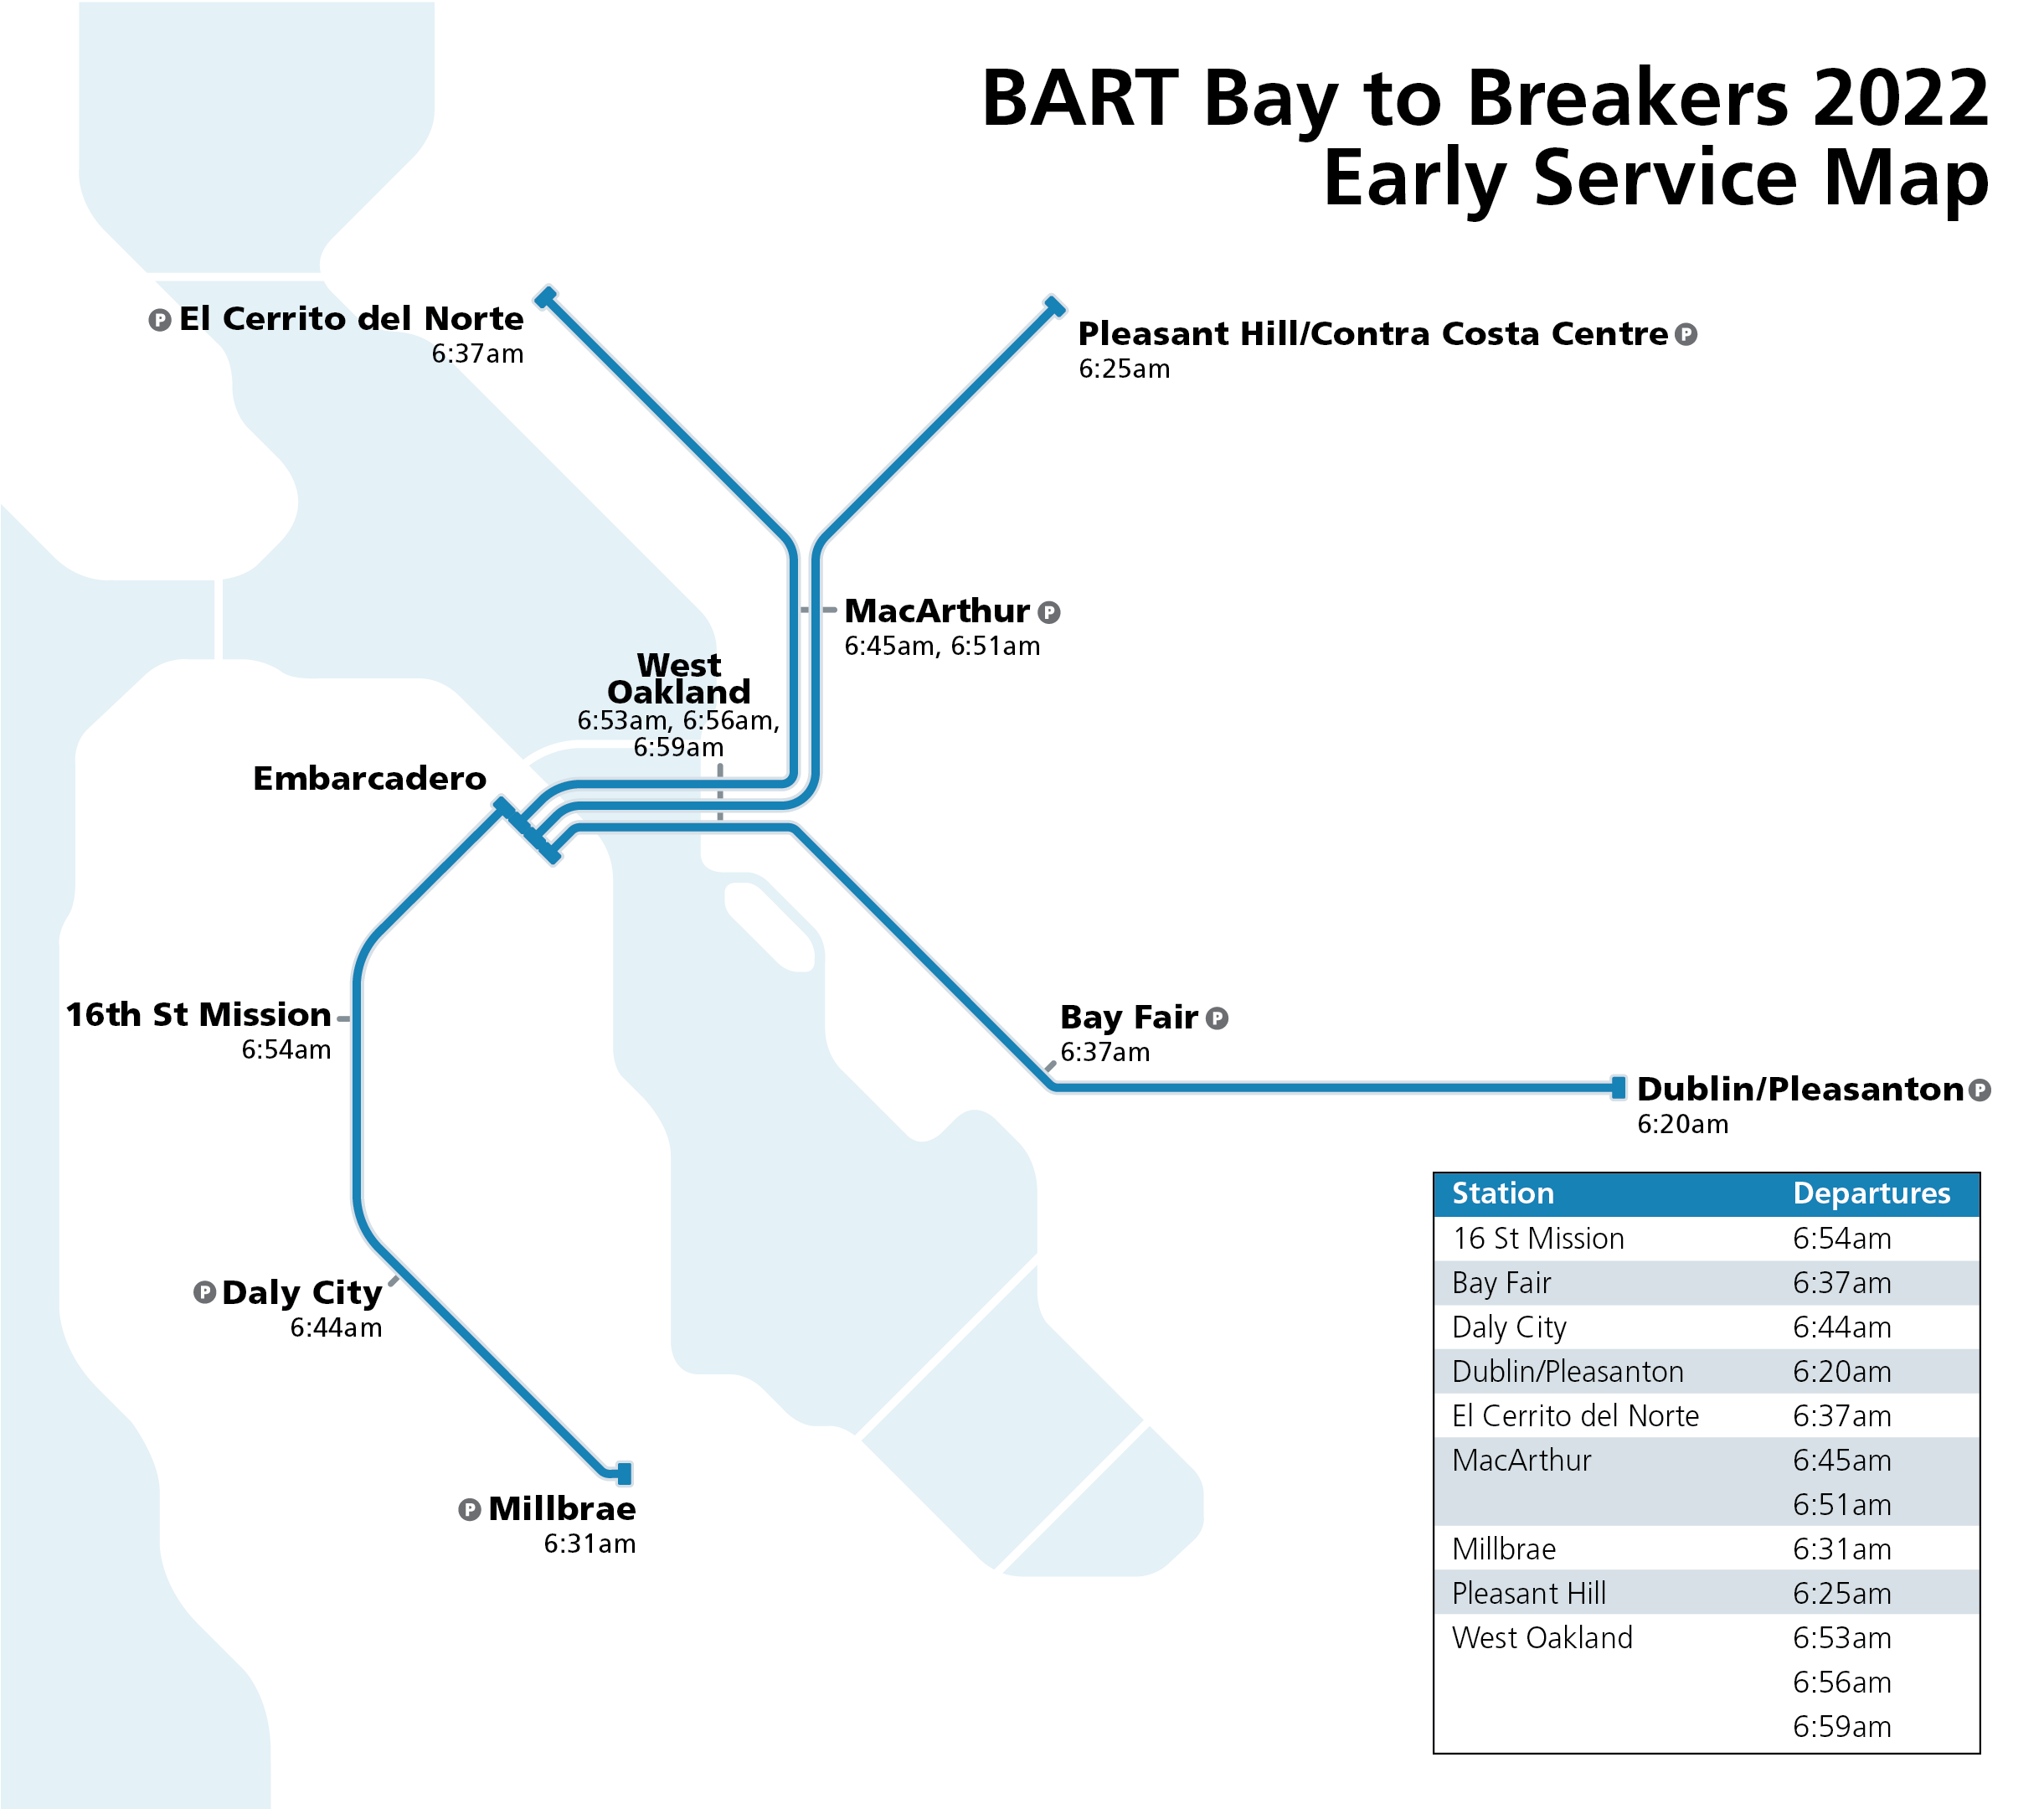 BART Bay to Breakers 2022 early service